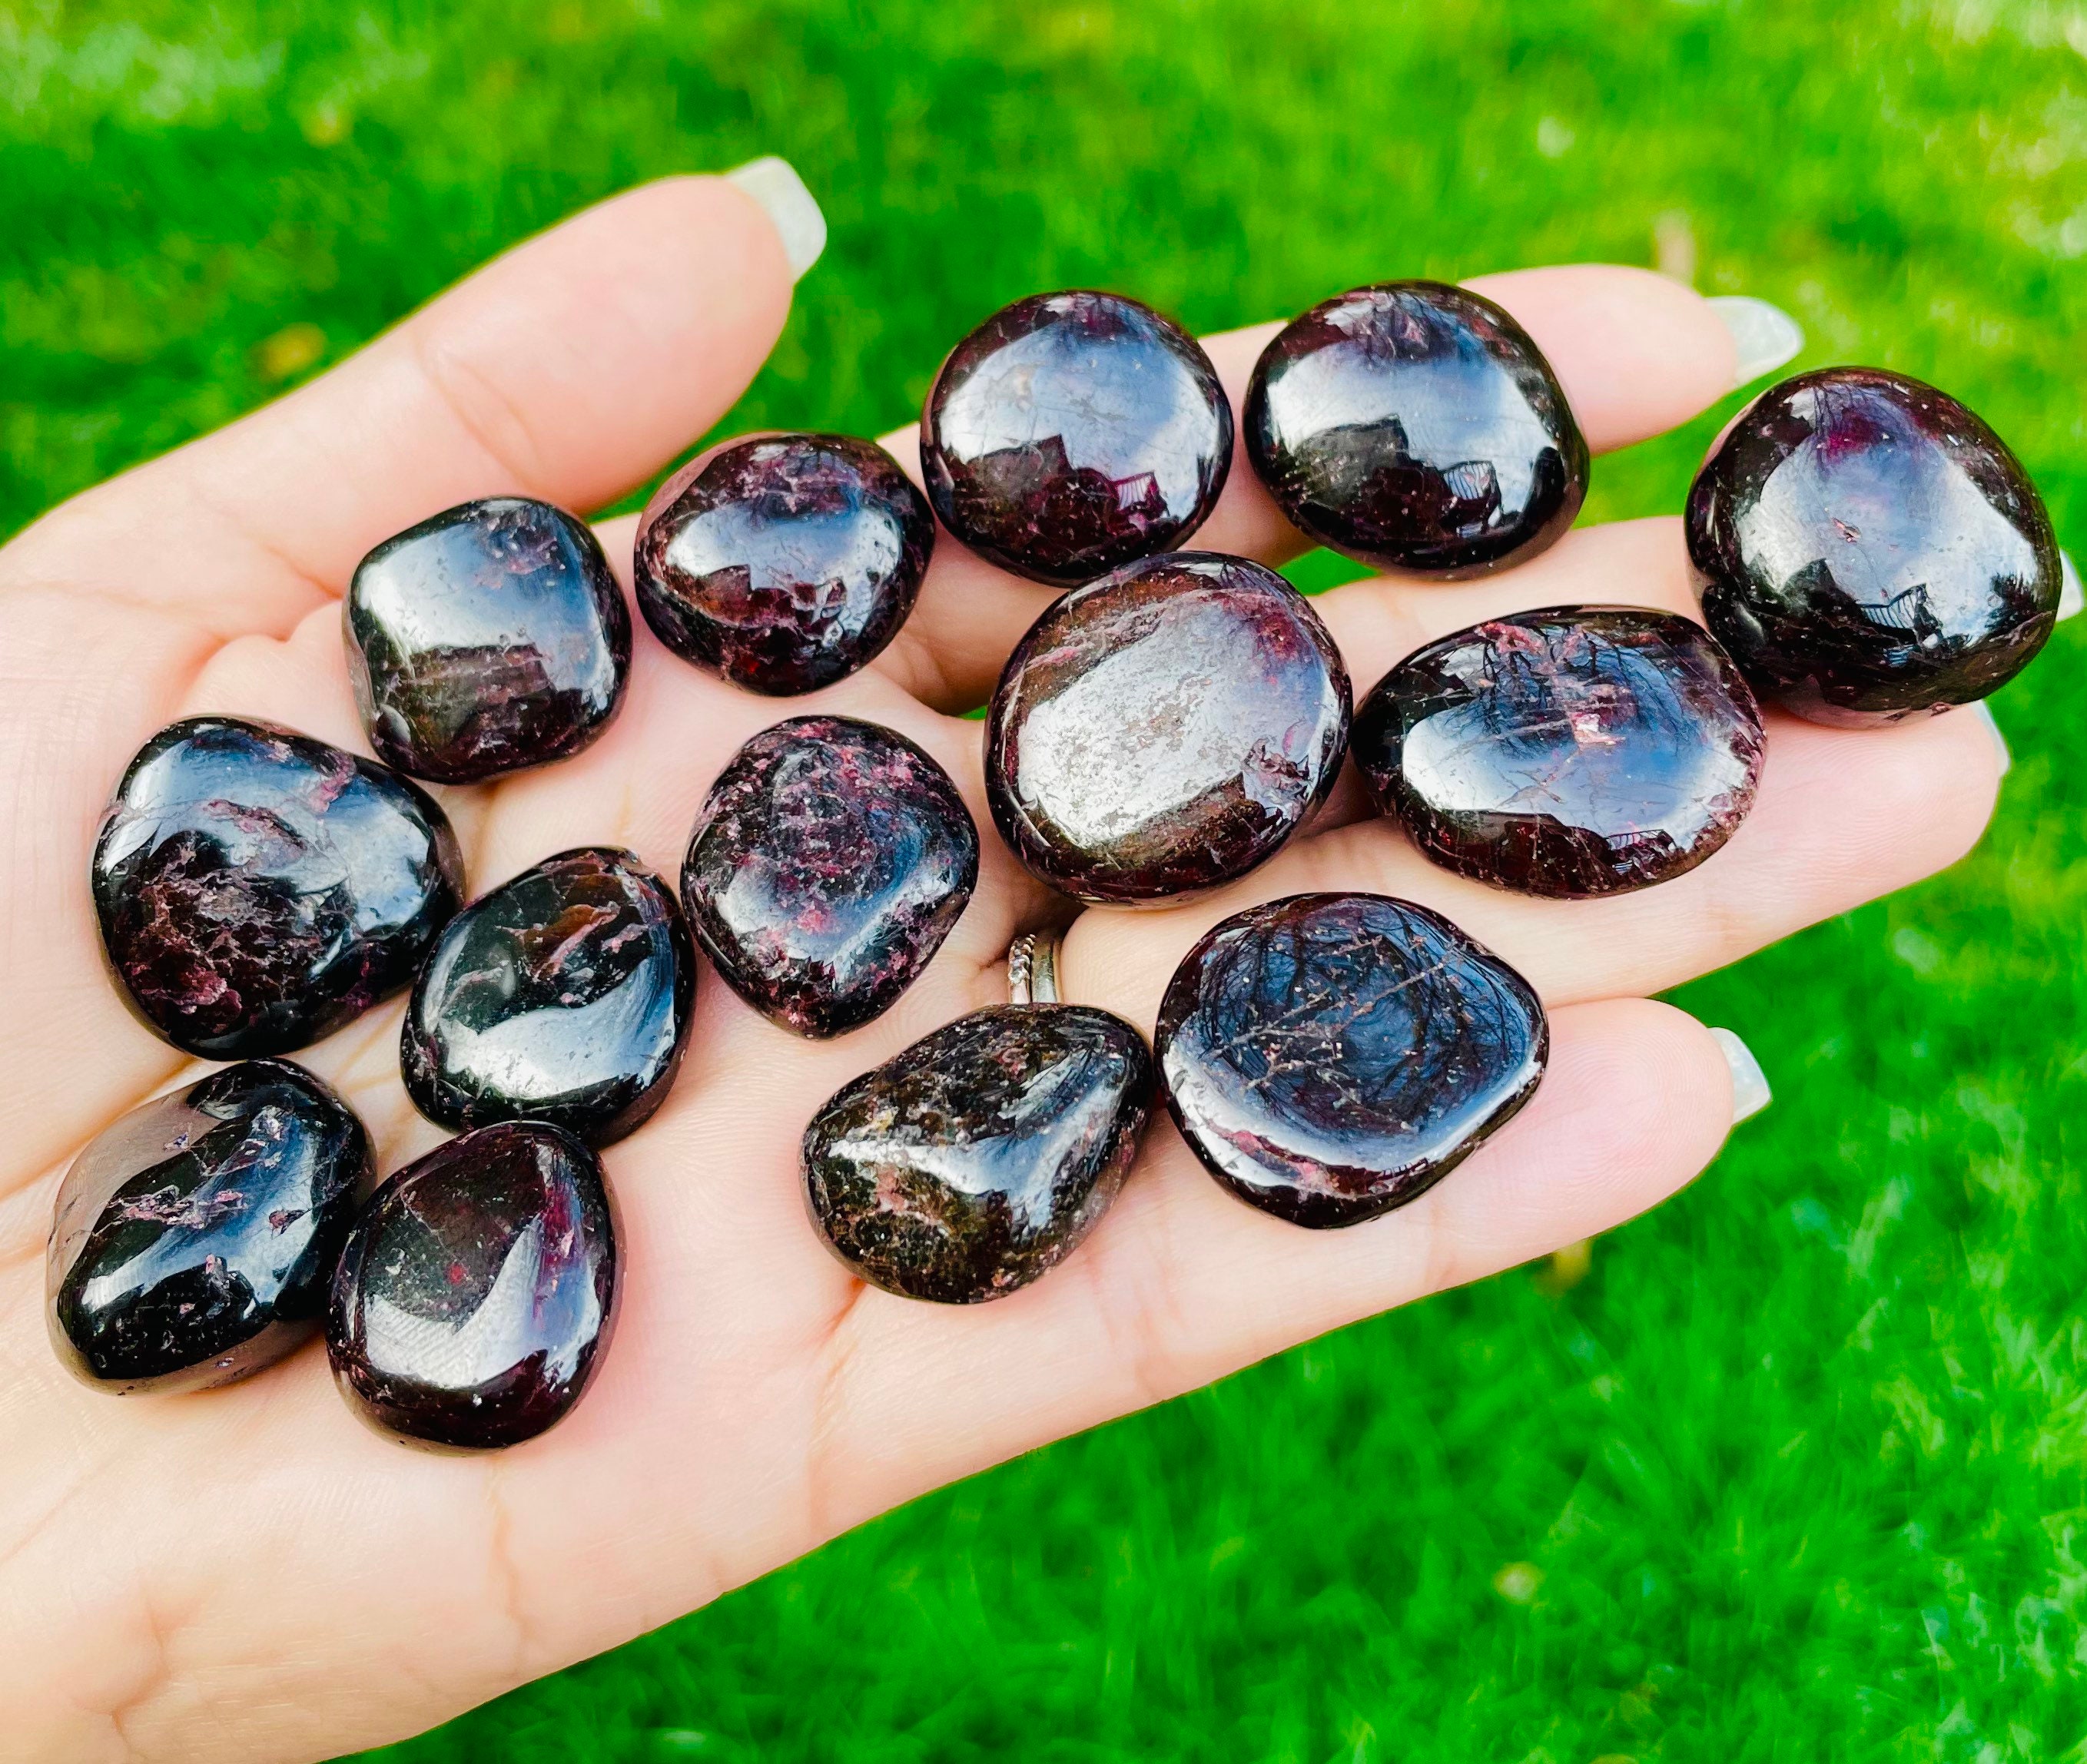 Garnet Tumbled Stones, Large, 15 to 19 grams, approx. 1 inch